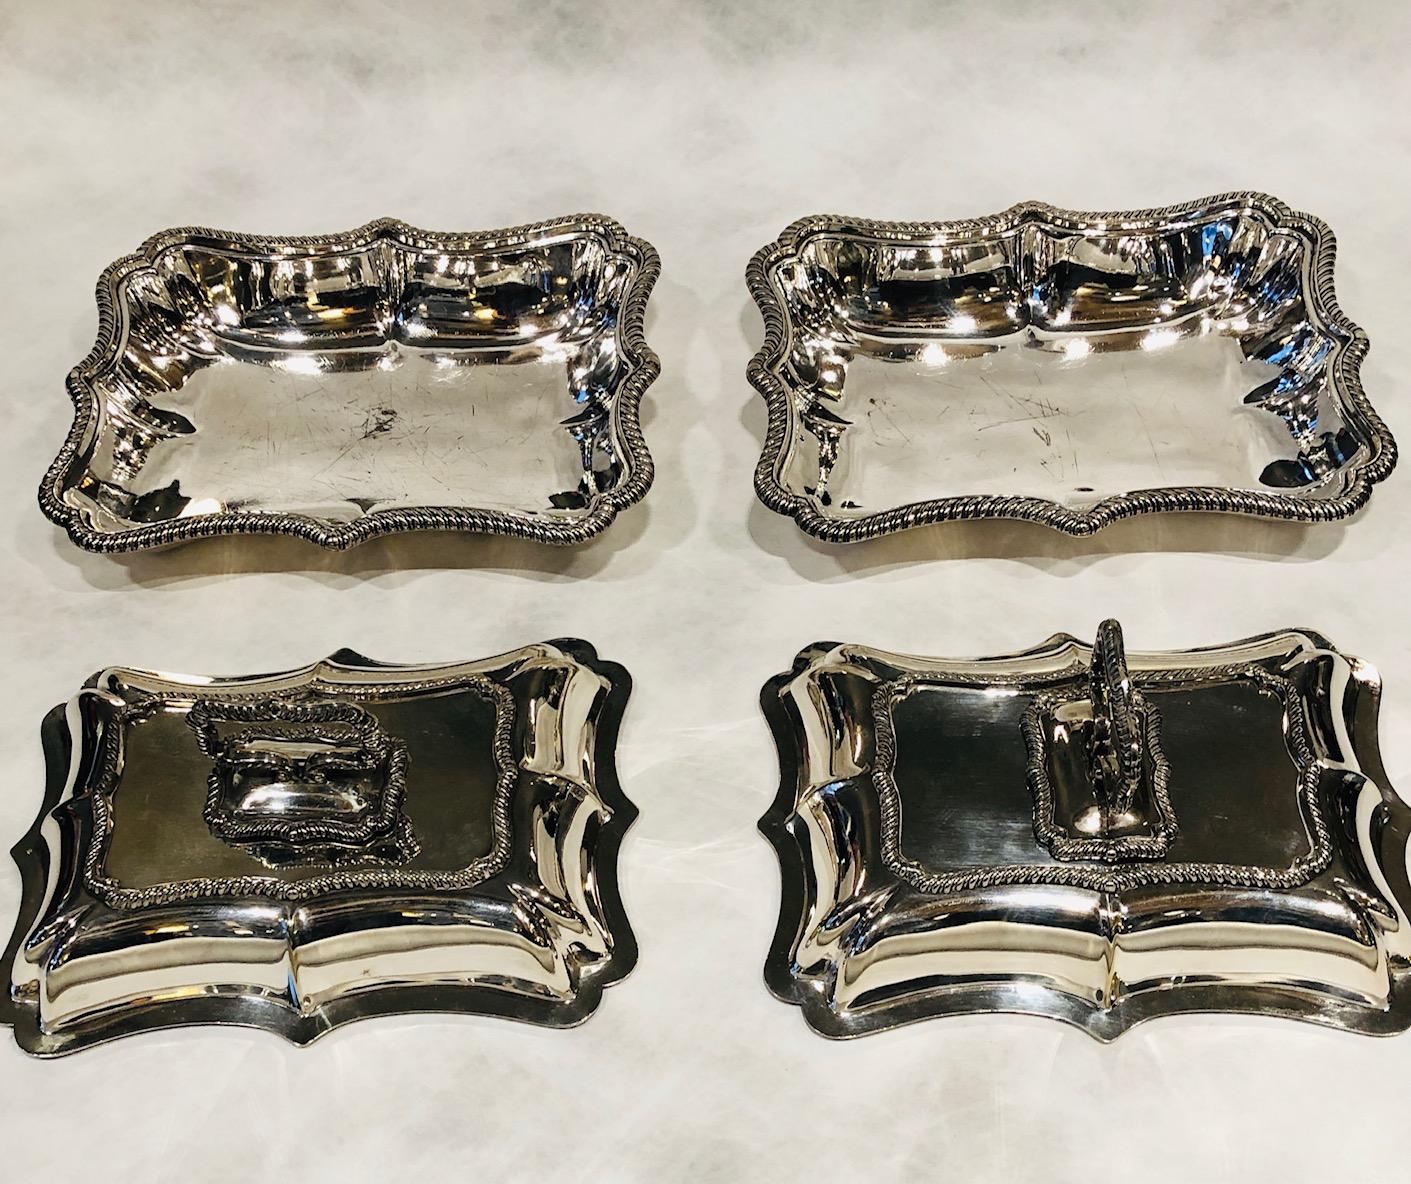 Alexander Clark double silver plated serving dishes, UK, circa 1900. Detachable decorative loop handles
Stamped: Alexander Clark London, Maker 188 Oxford Street, A1 Wellbeck Plate 304.